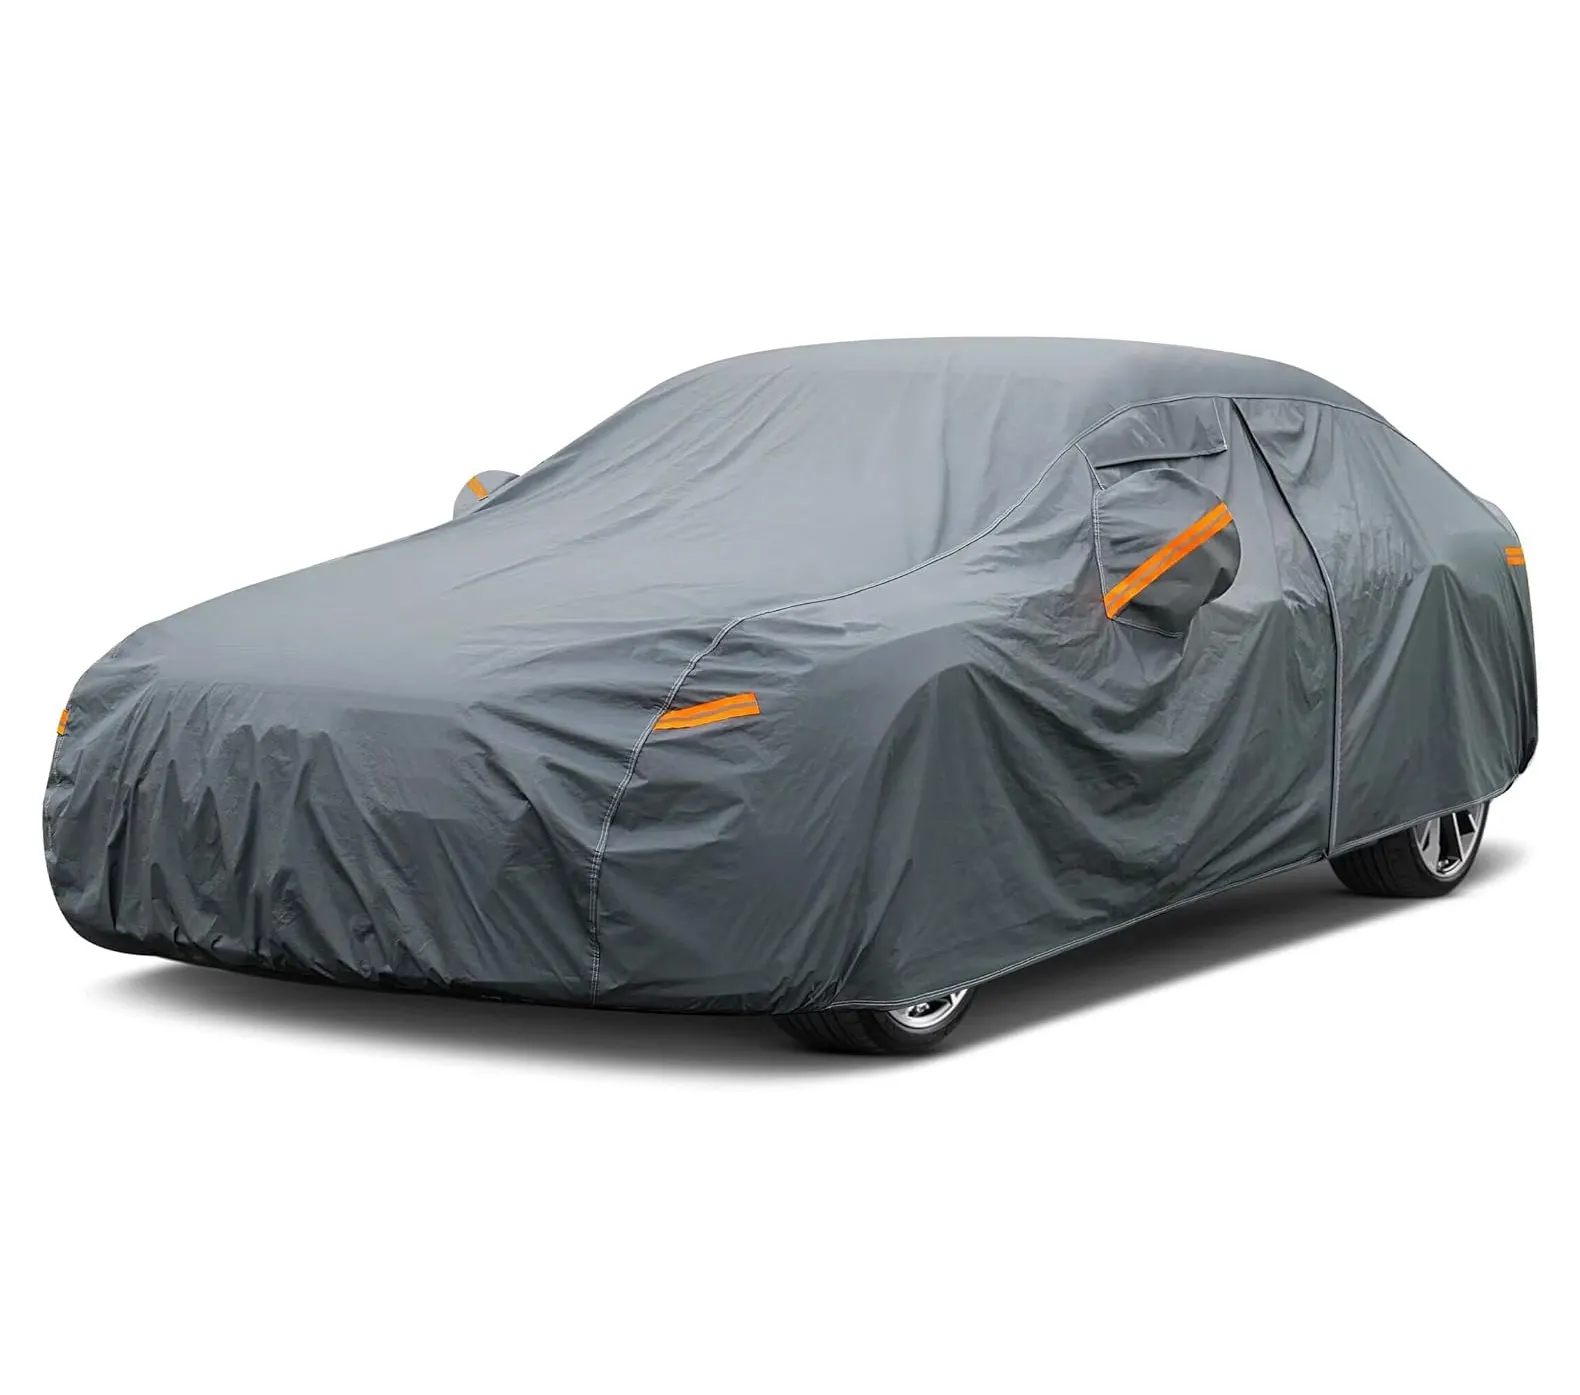 pvc cotton waterproof car cover heavy duty car cover all weather best car cover